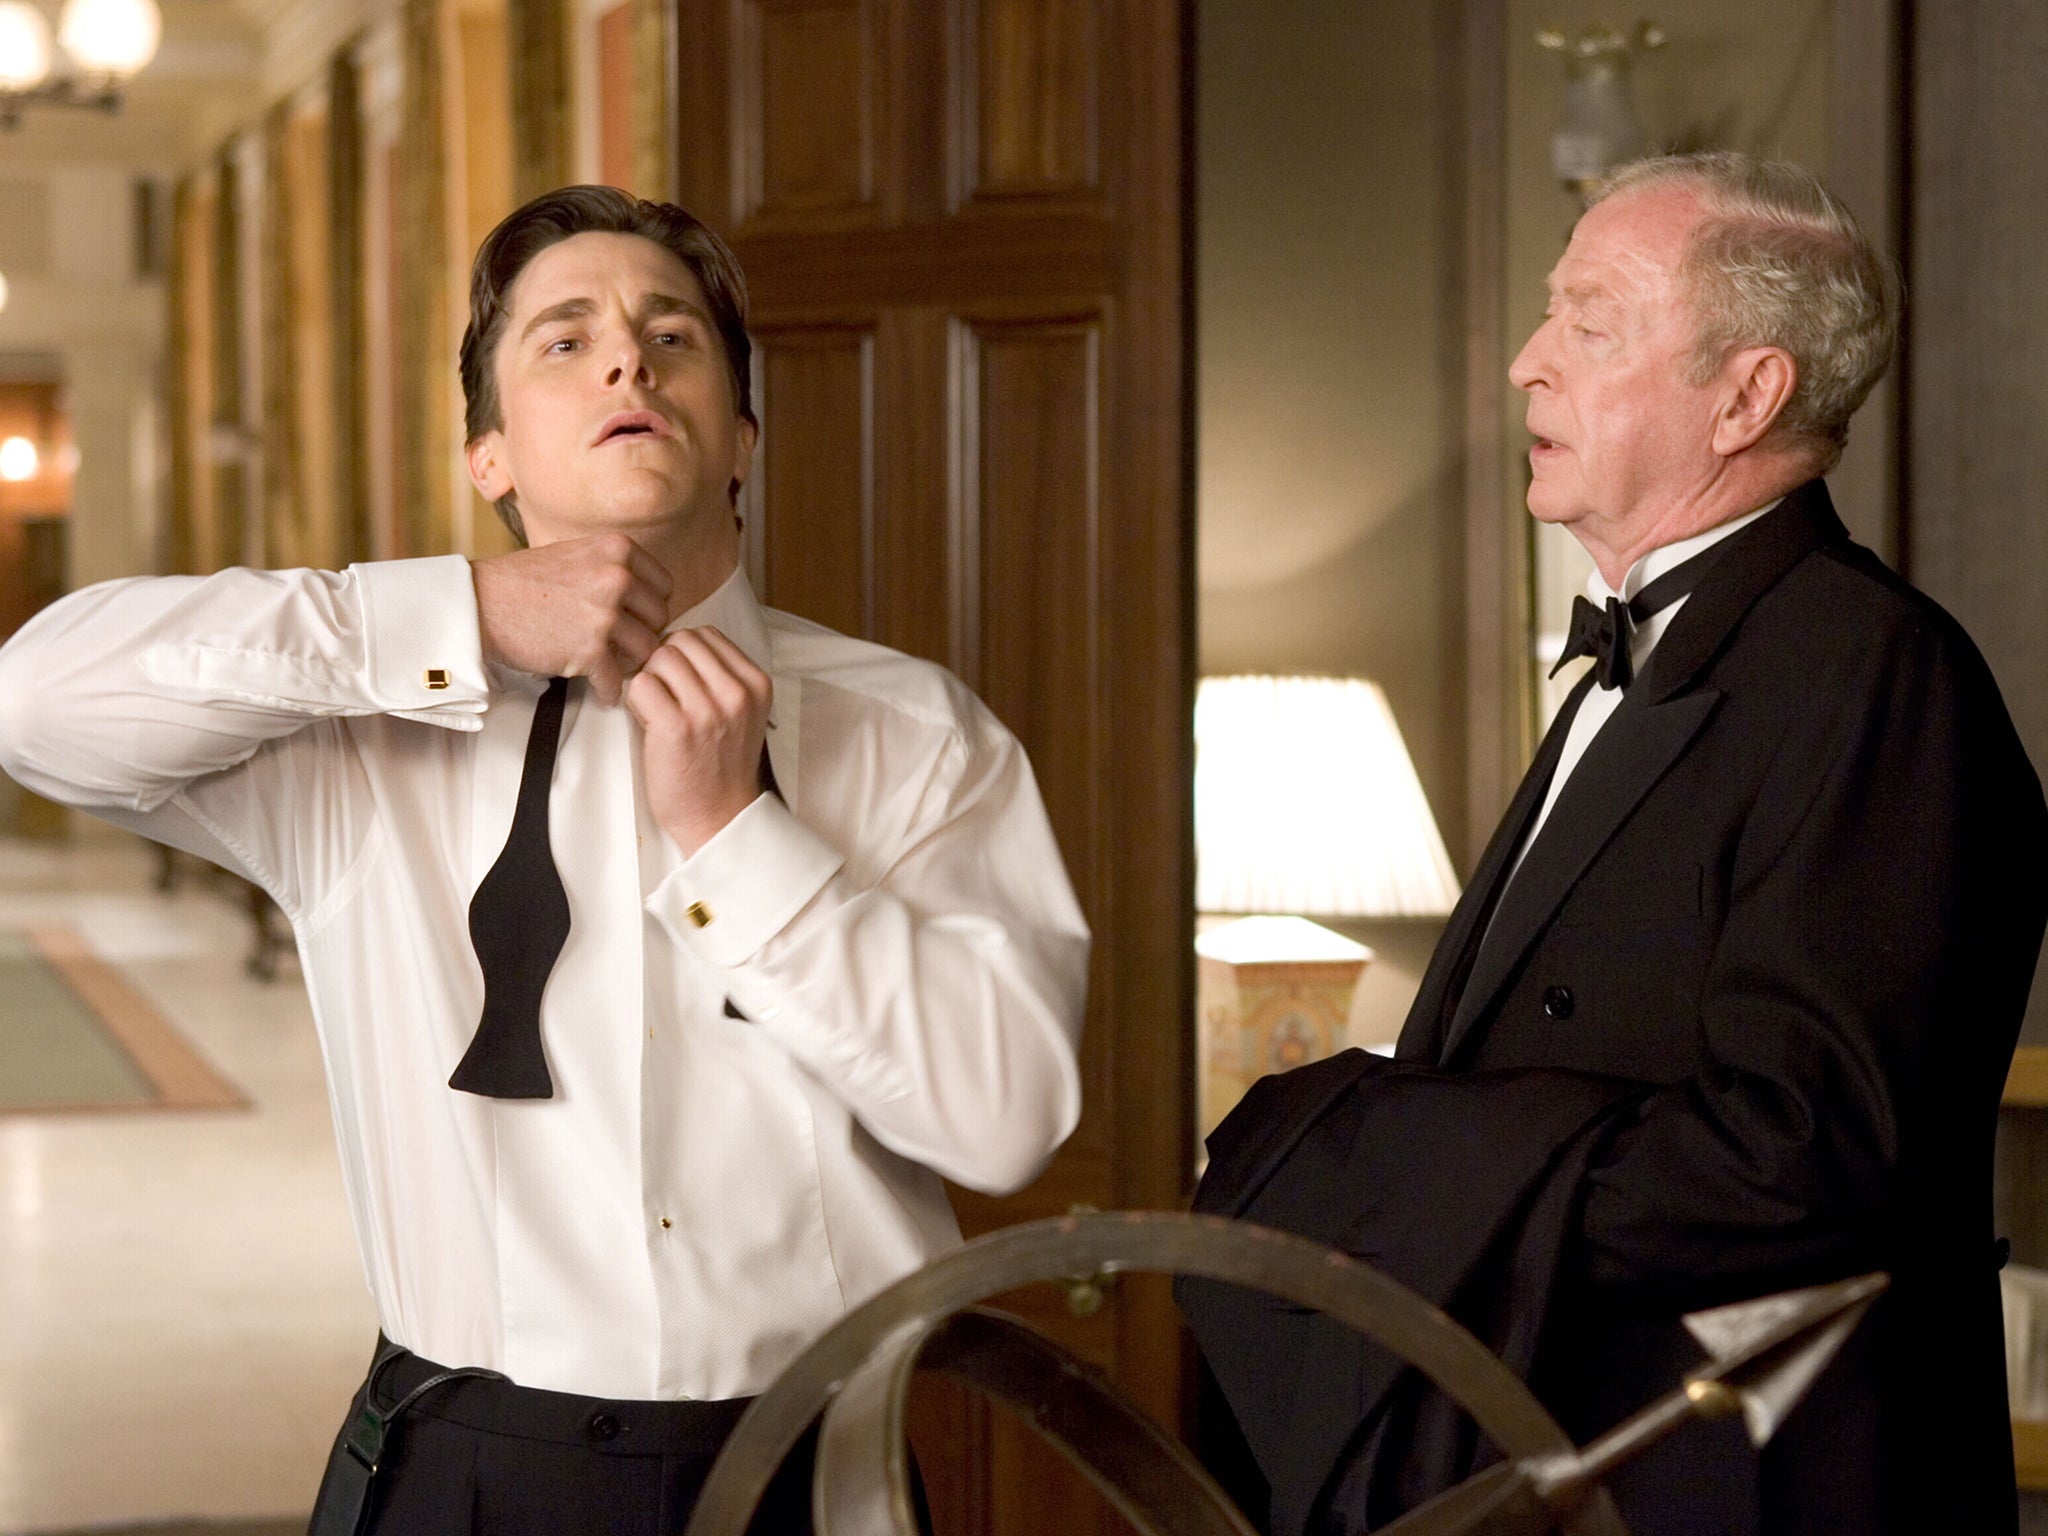 Christian Bale as Bruce Wayne, AKA Batman, and Michael Caine as Alfred in the Christopher Nolan series